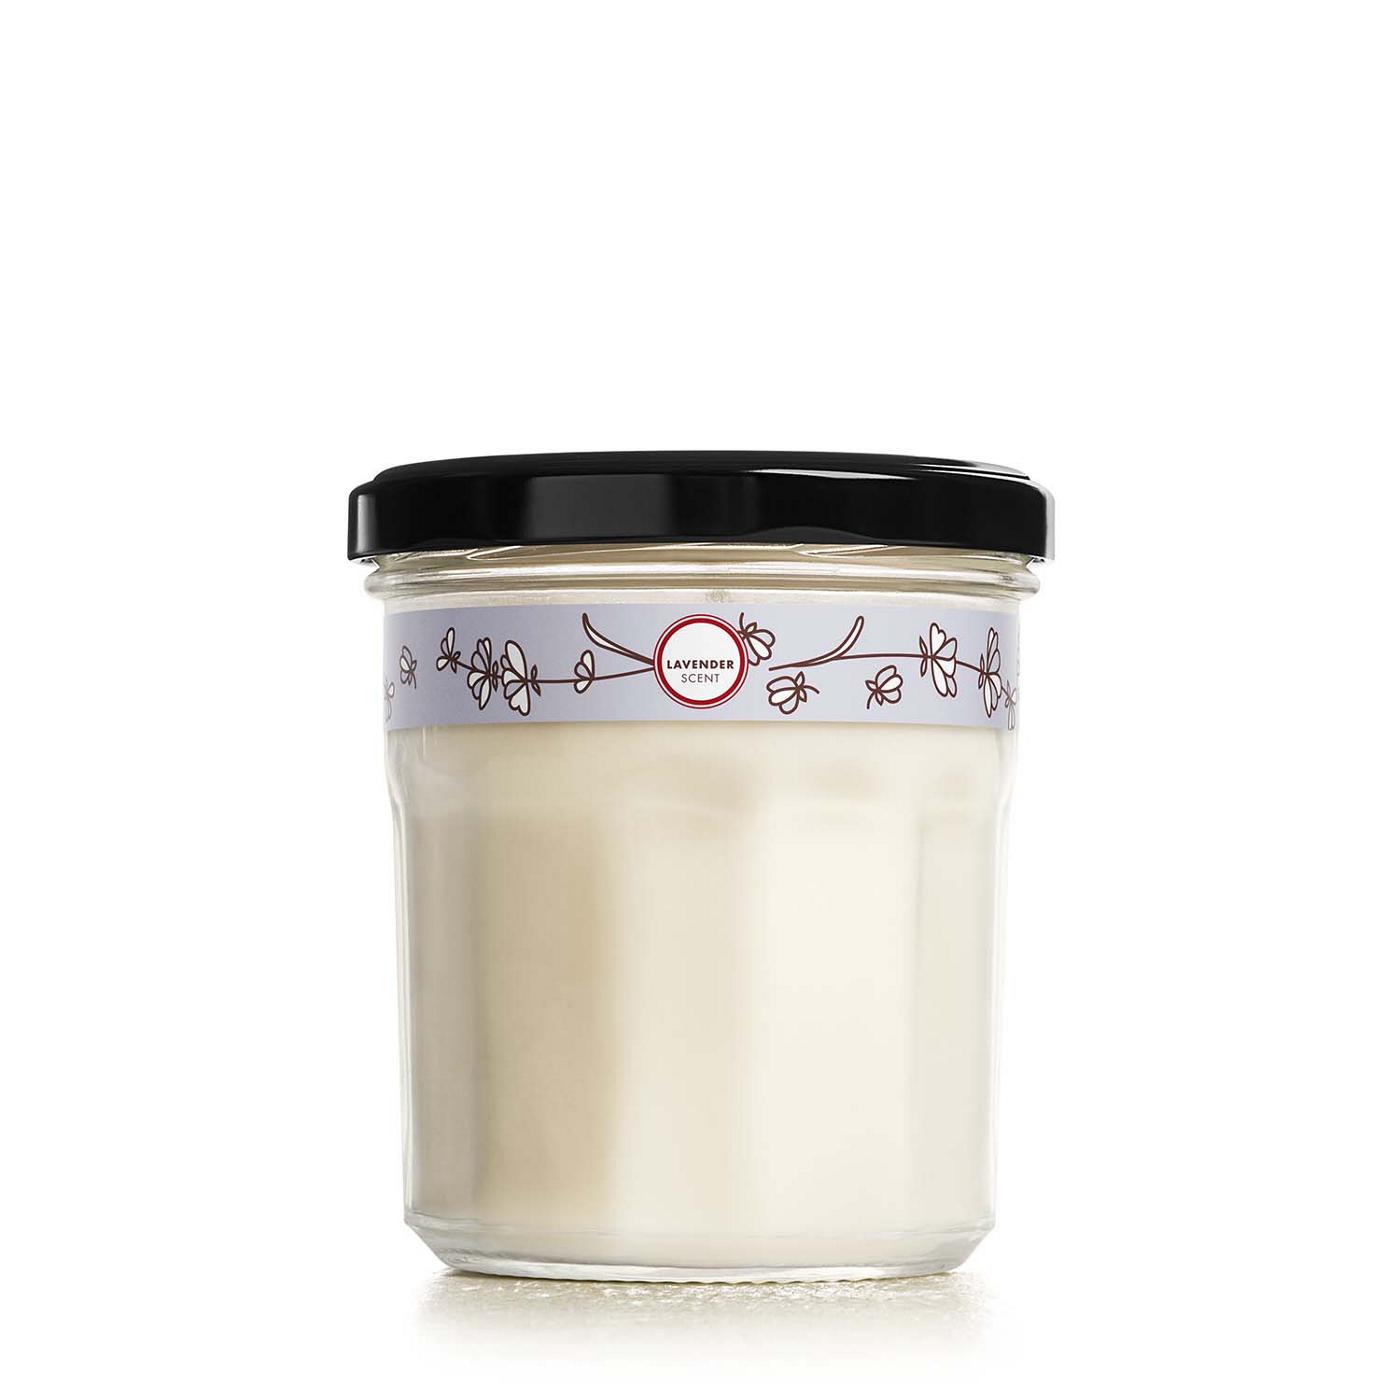 Mrs. Meyer's Clean Day Lavender Soy Candle; image 1 of 6